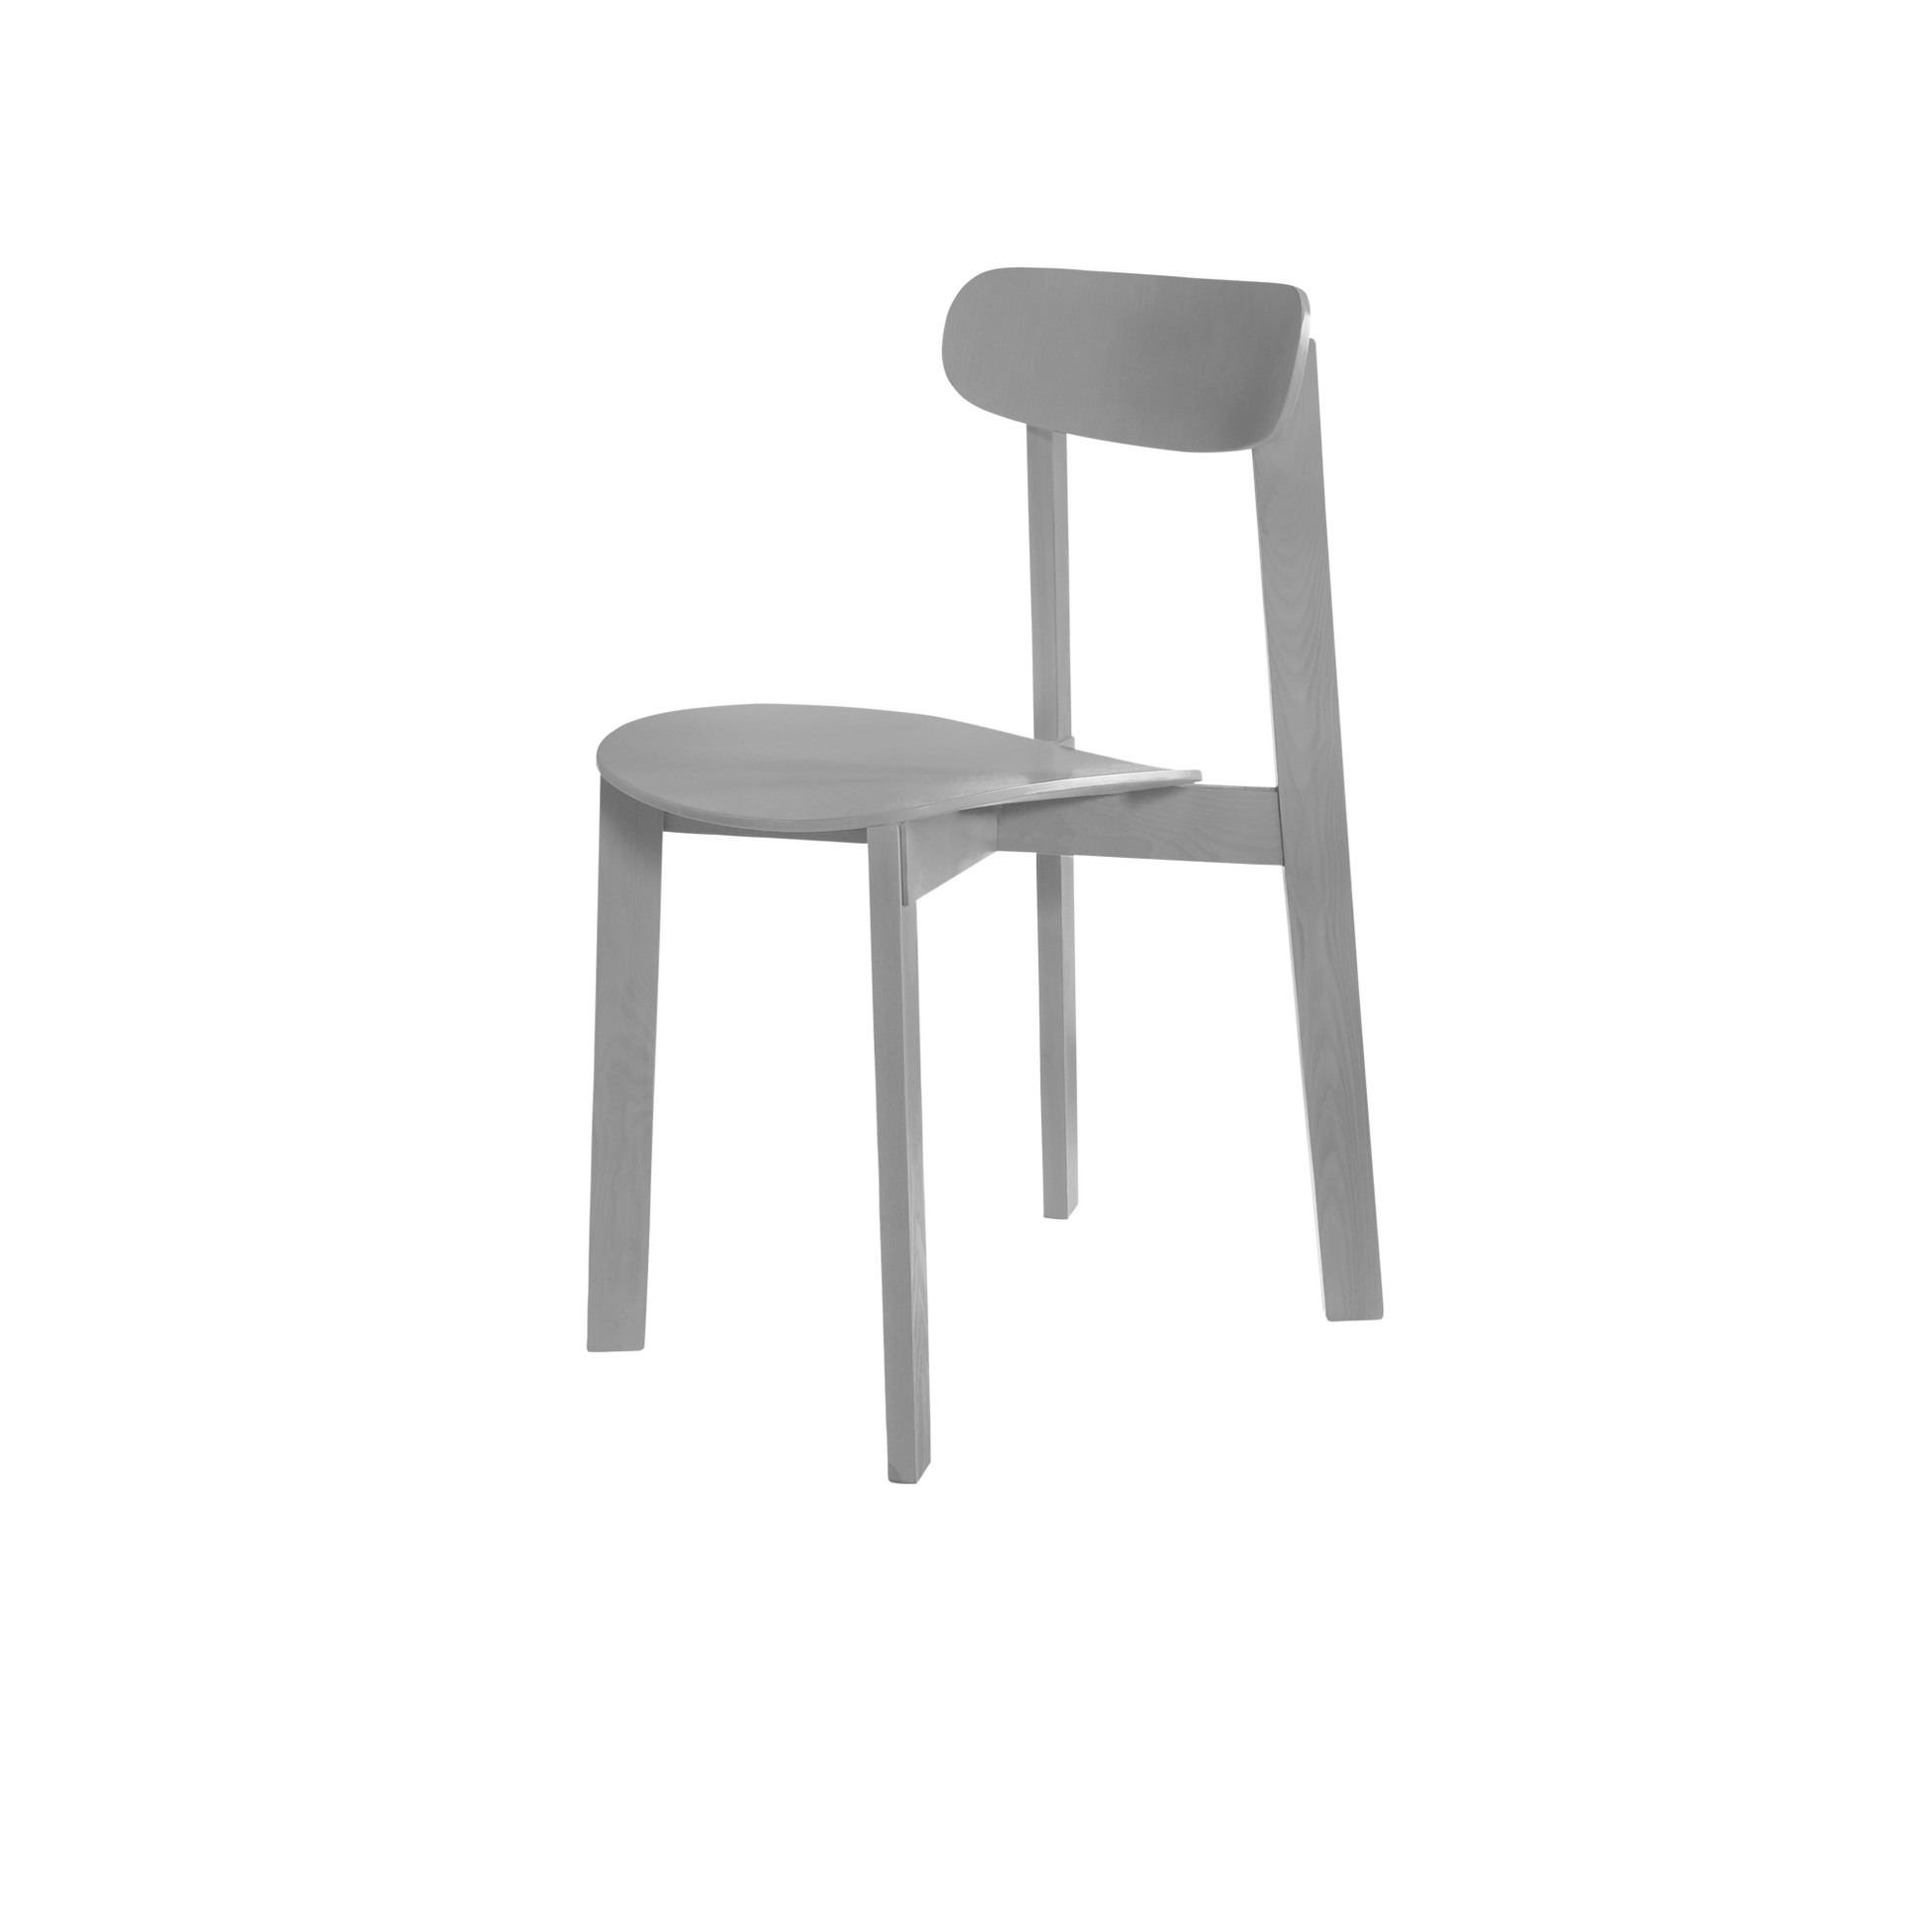 Bondi Dining Chair by Please wait to be seated #Ash Grey